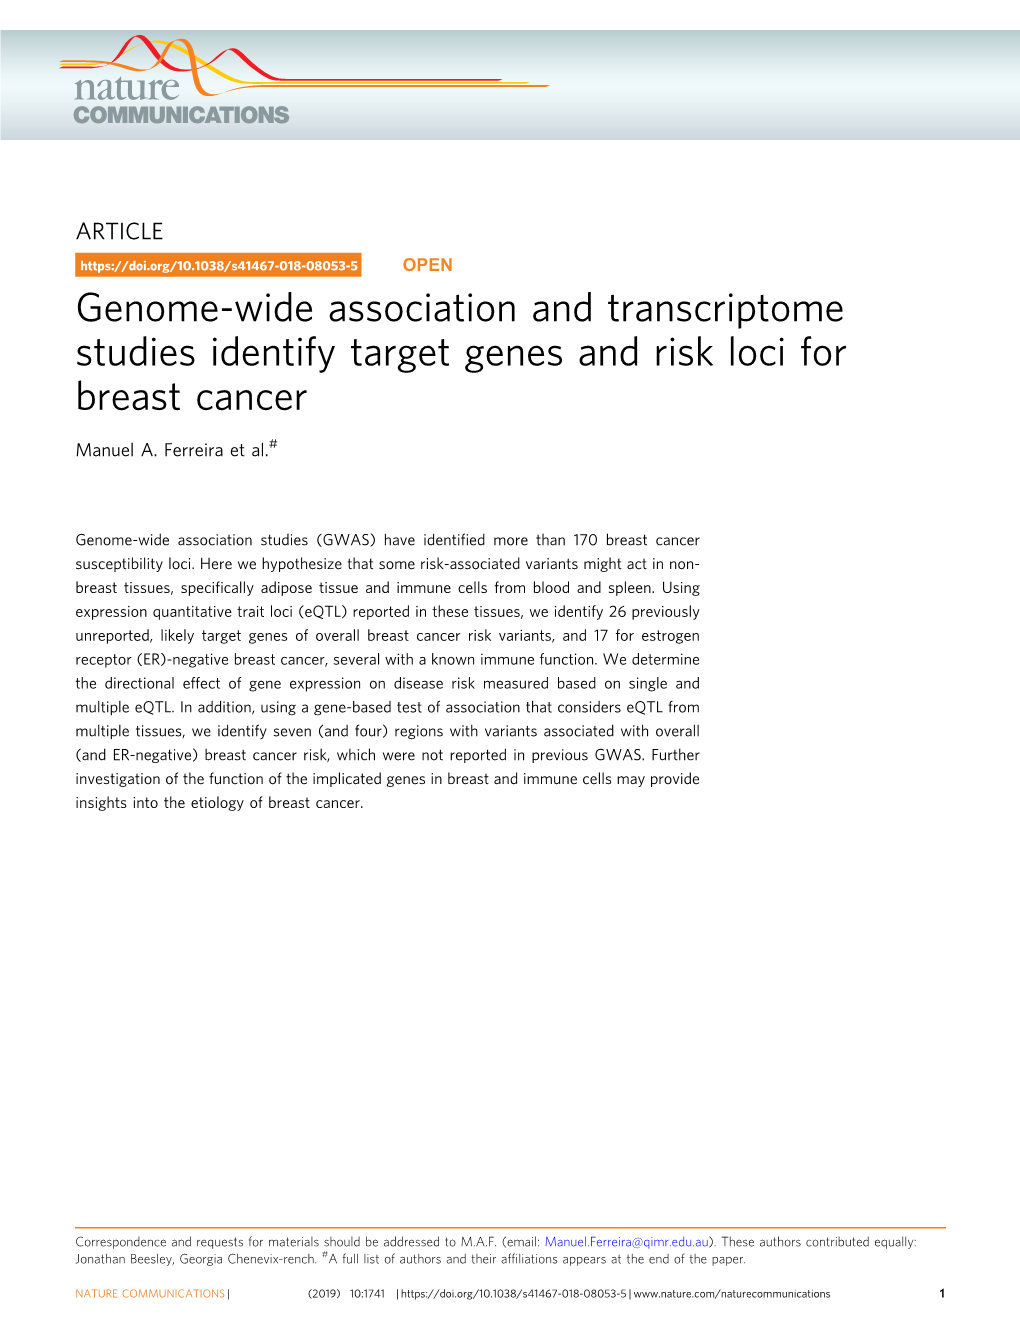 Genome-Wide Association and Transcriptome Studies Identify Target Genes and Risk Loci for Breast Cancer